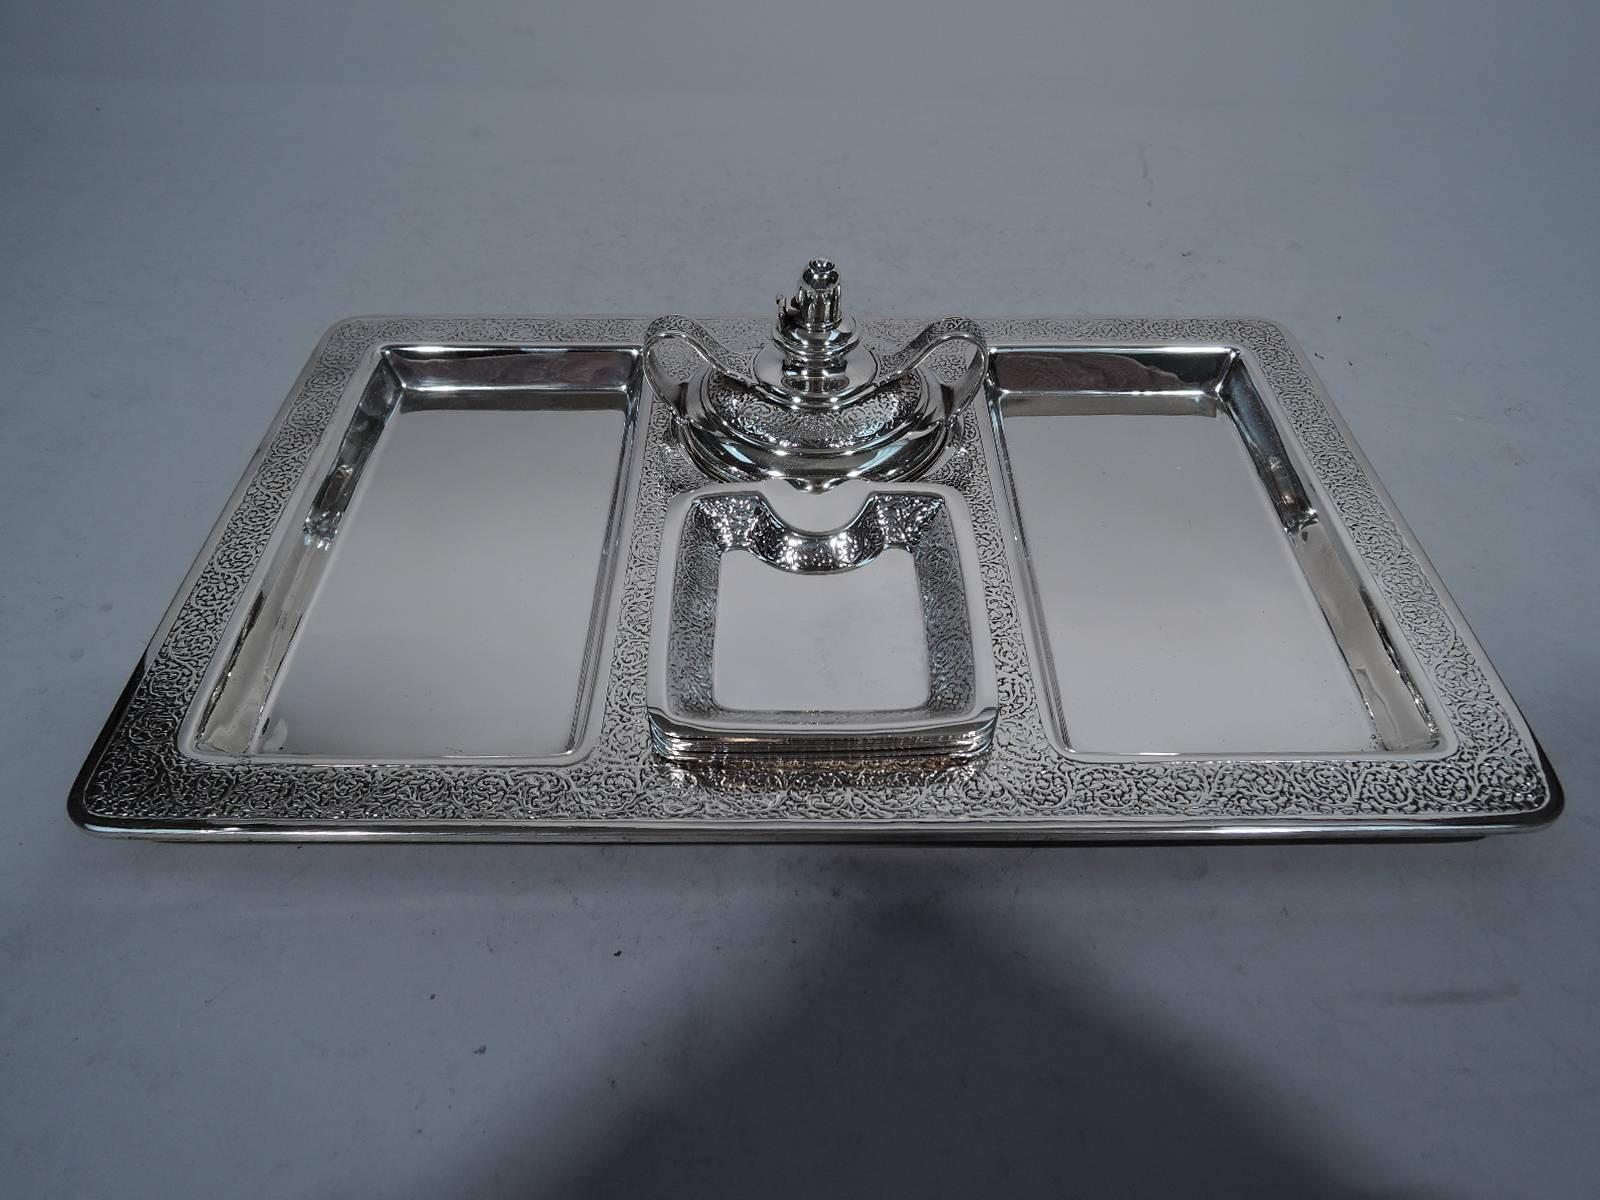 Sterling silver smoking set. Made by Tiffany & Co. in New York, circa 1916. This set comprises one tray, six ashtrays and one cigar lighter.

Tray has four plain wells: Two rectangles for cigars, one square for matches and one circle for cigar